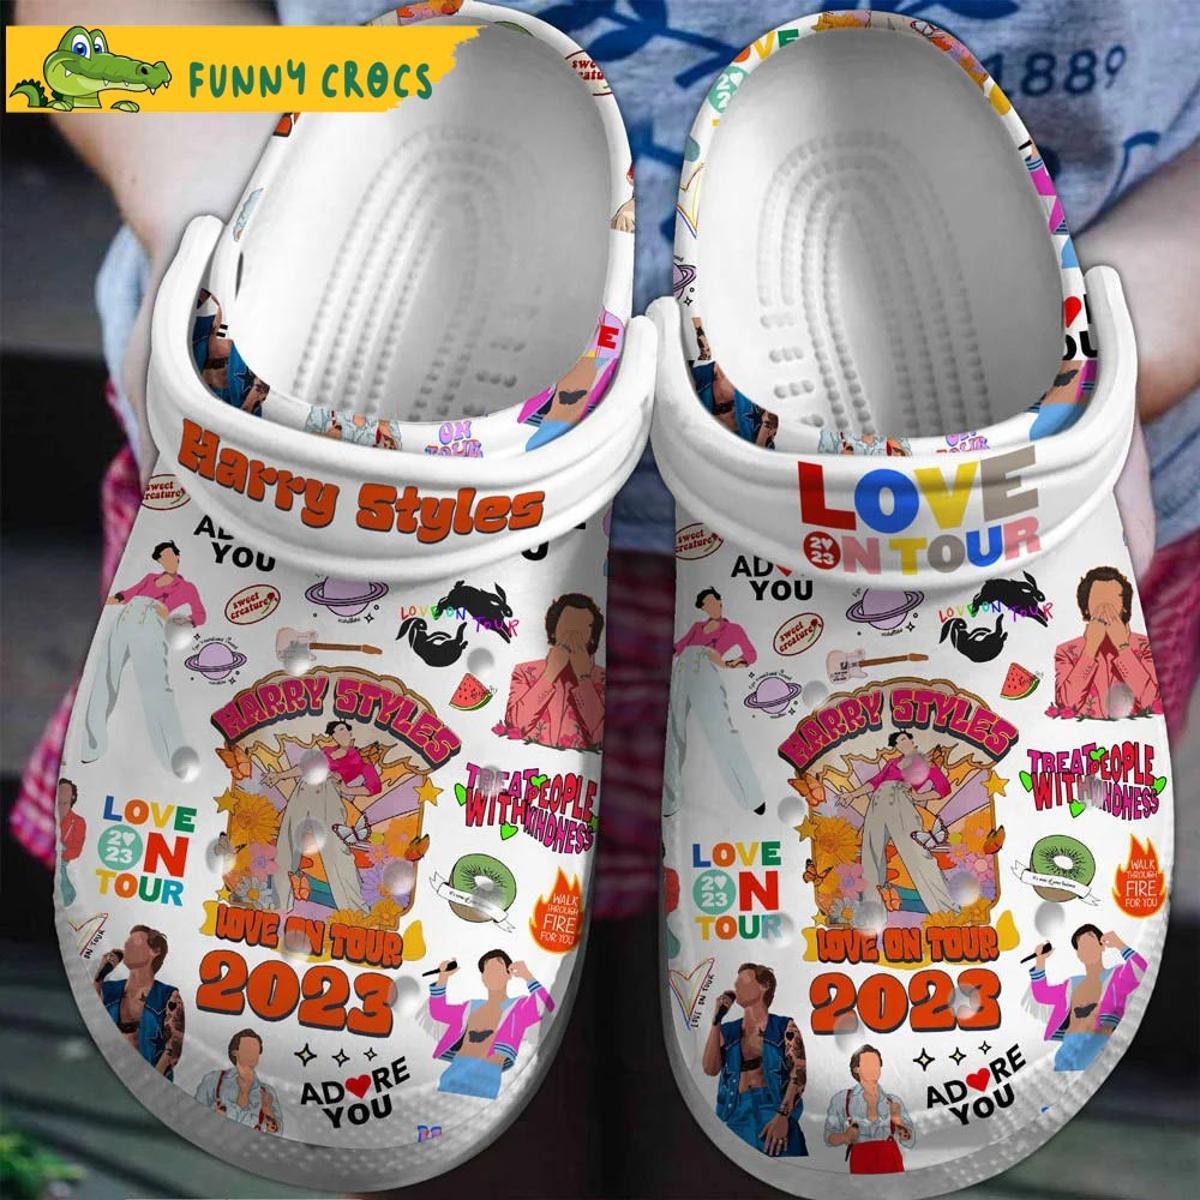 Harry Styles Young Crocs Slippers